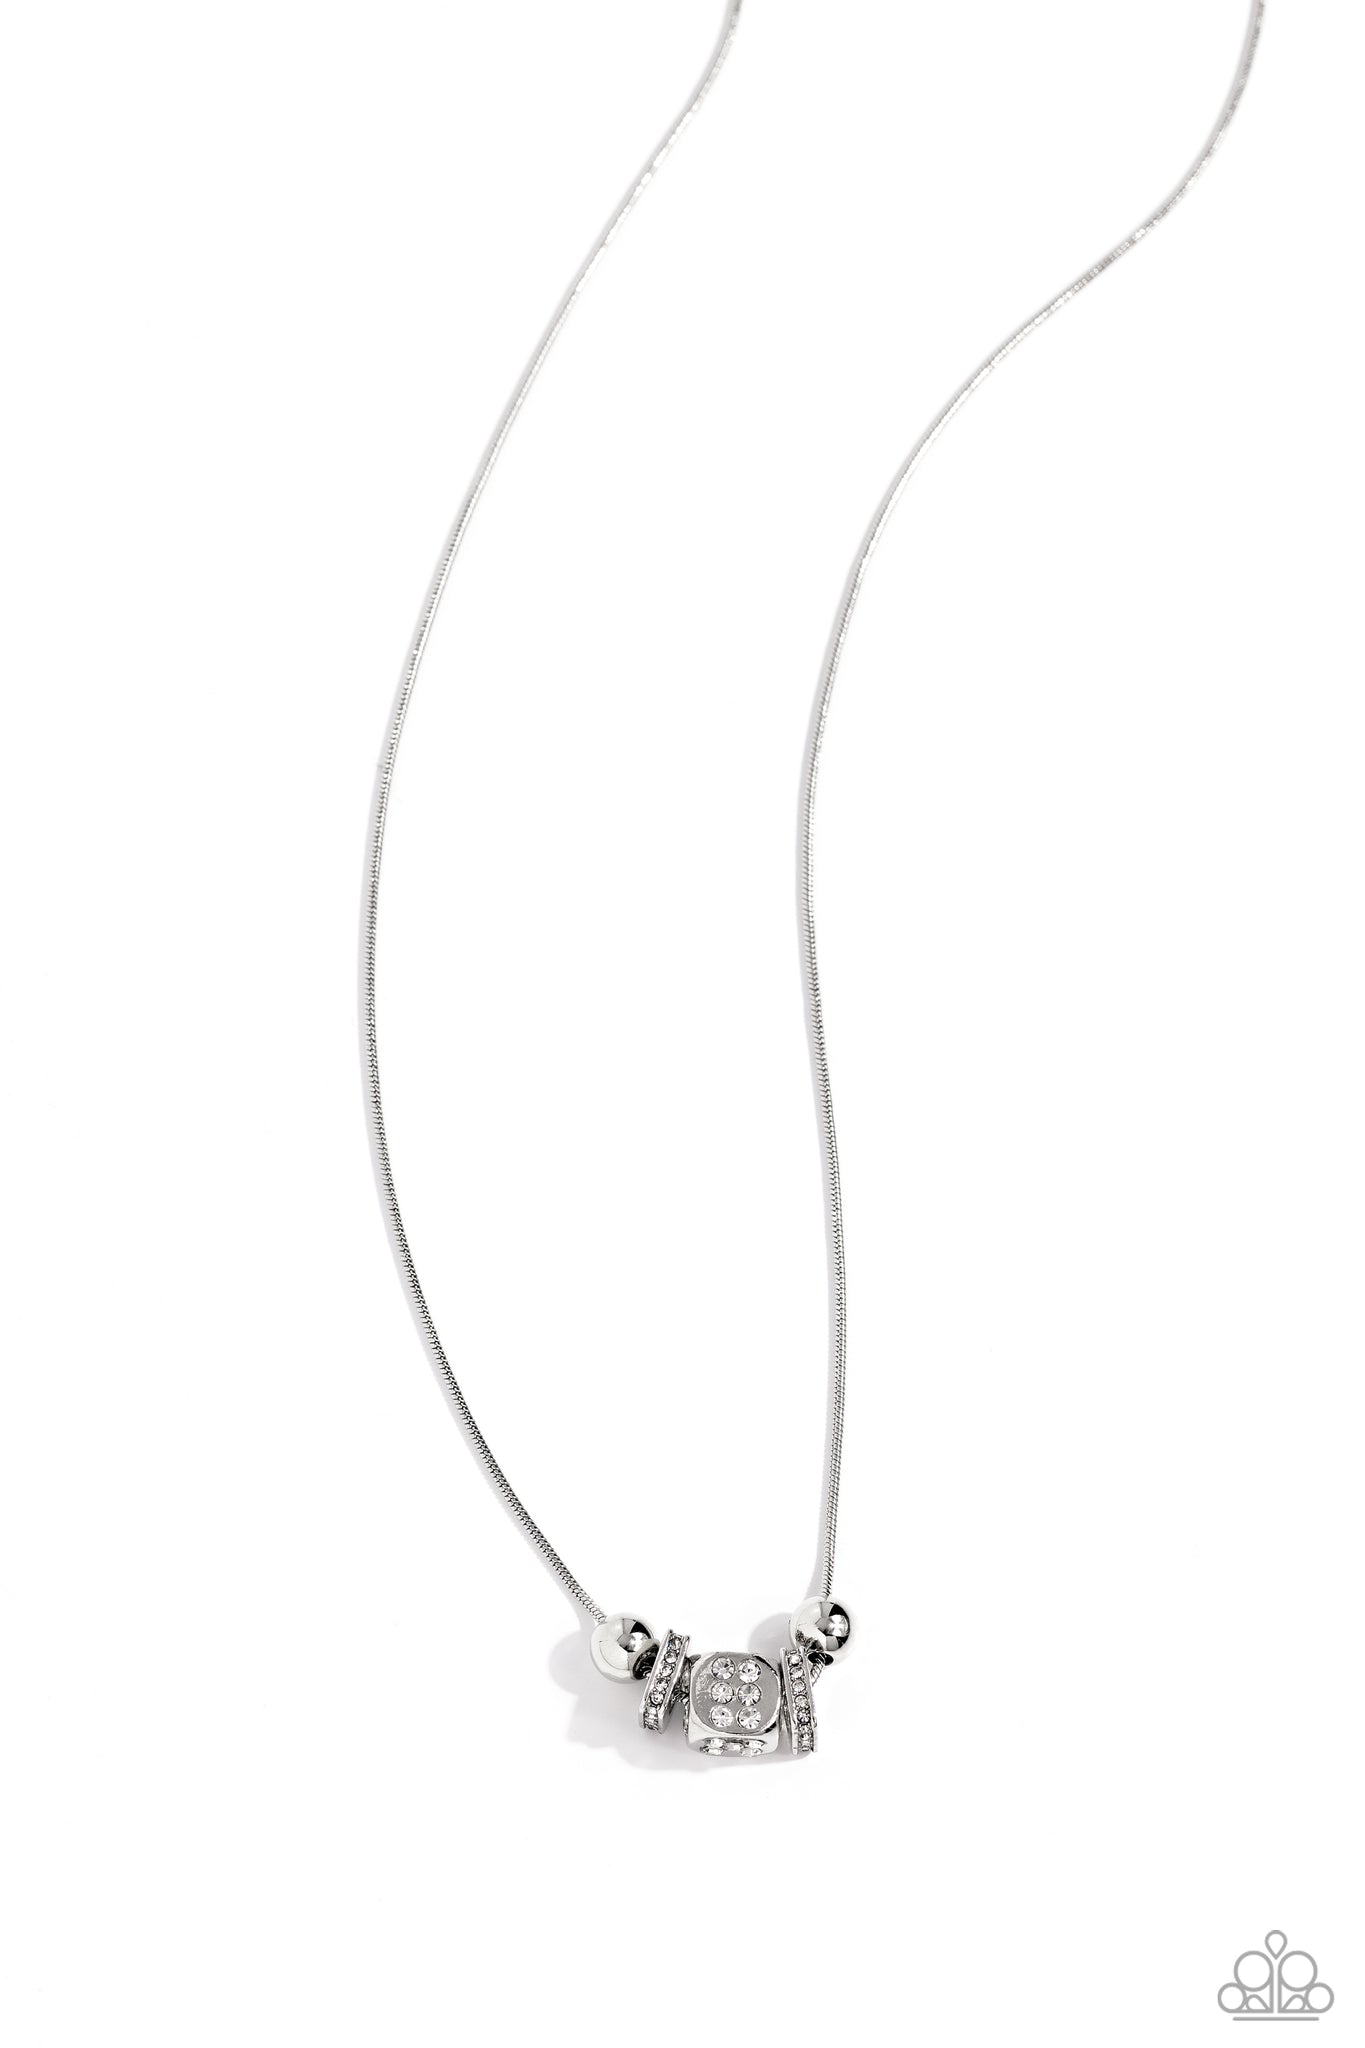 Rolling the Dice Necklace (White, Black)